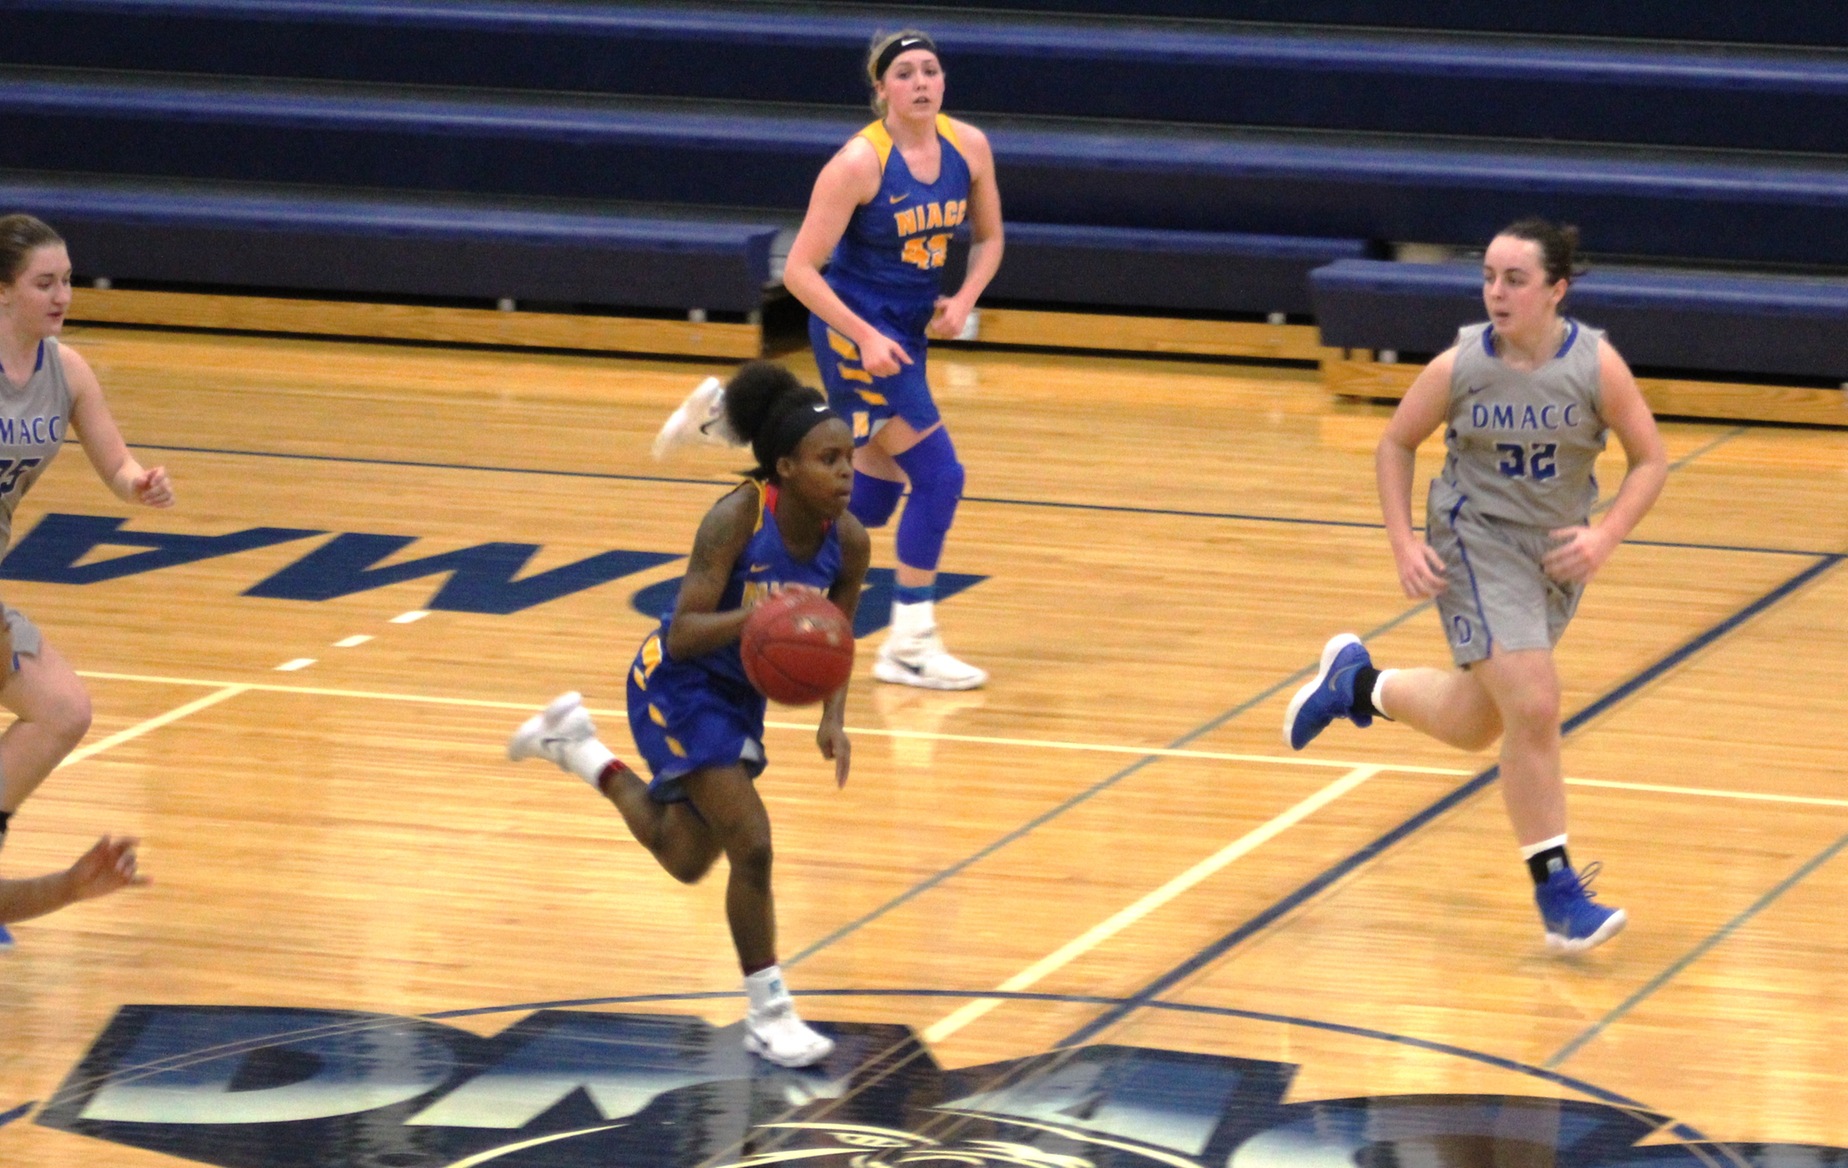 NIACC's UU Longs pushes the ball upcourt during Saturday's game at DMACC.